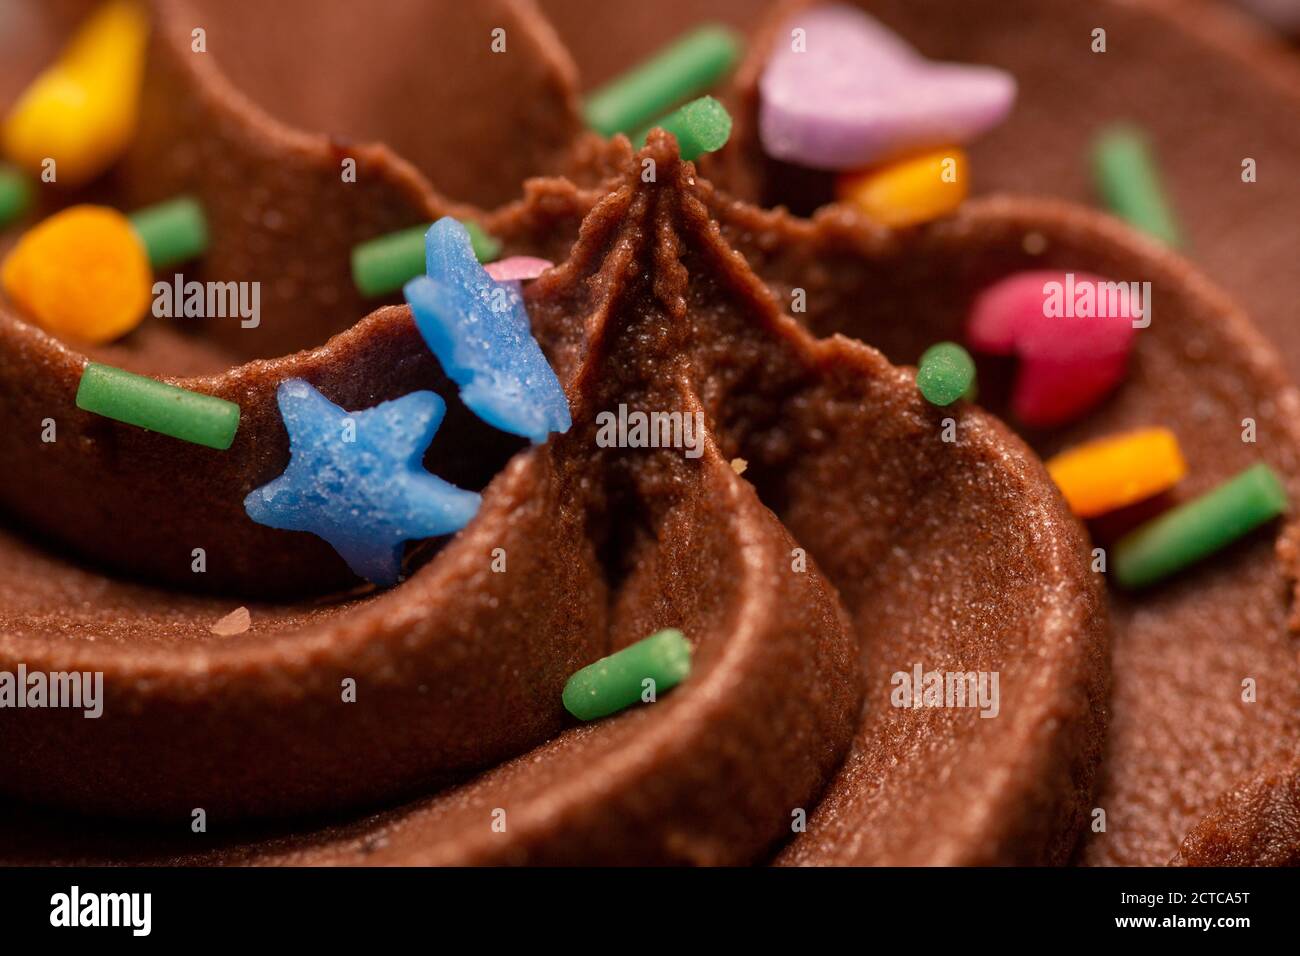 A close up of the icing and sprinkles on a chocolate cupcake using selective focus Stock Photo